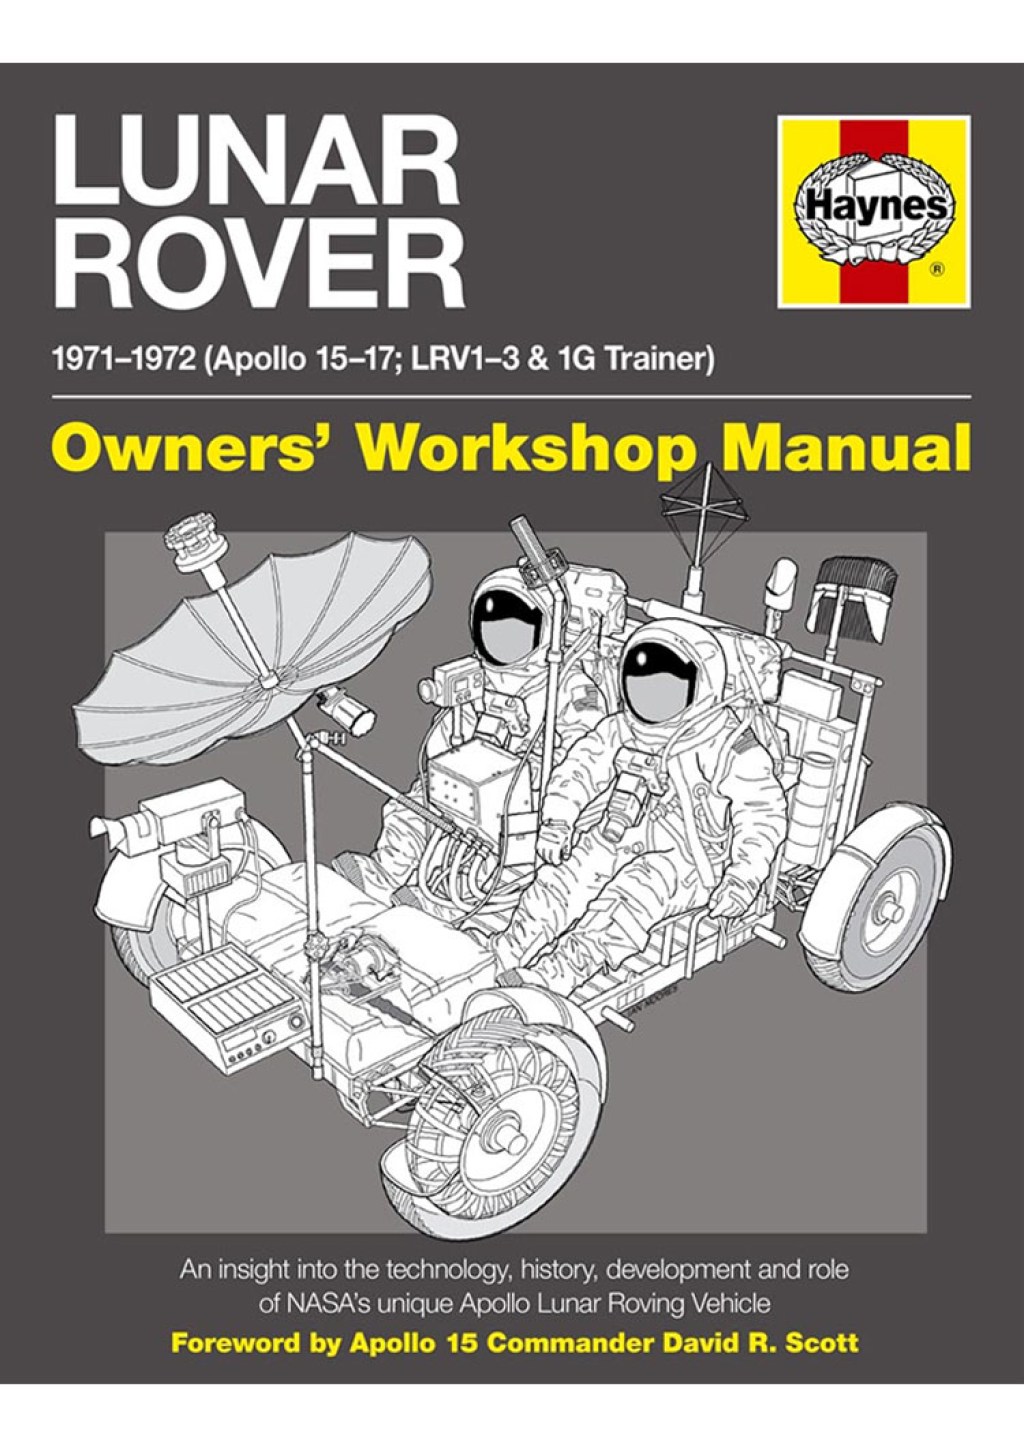 Picture of: Lunar Rover Owners’ Workshop Manual